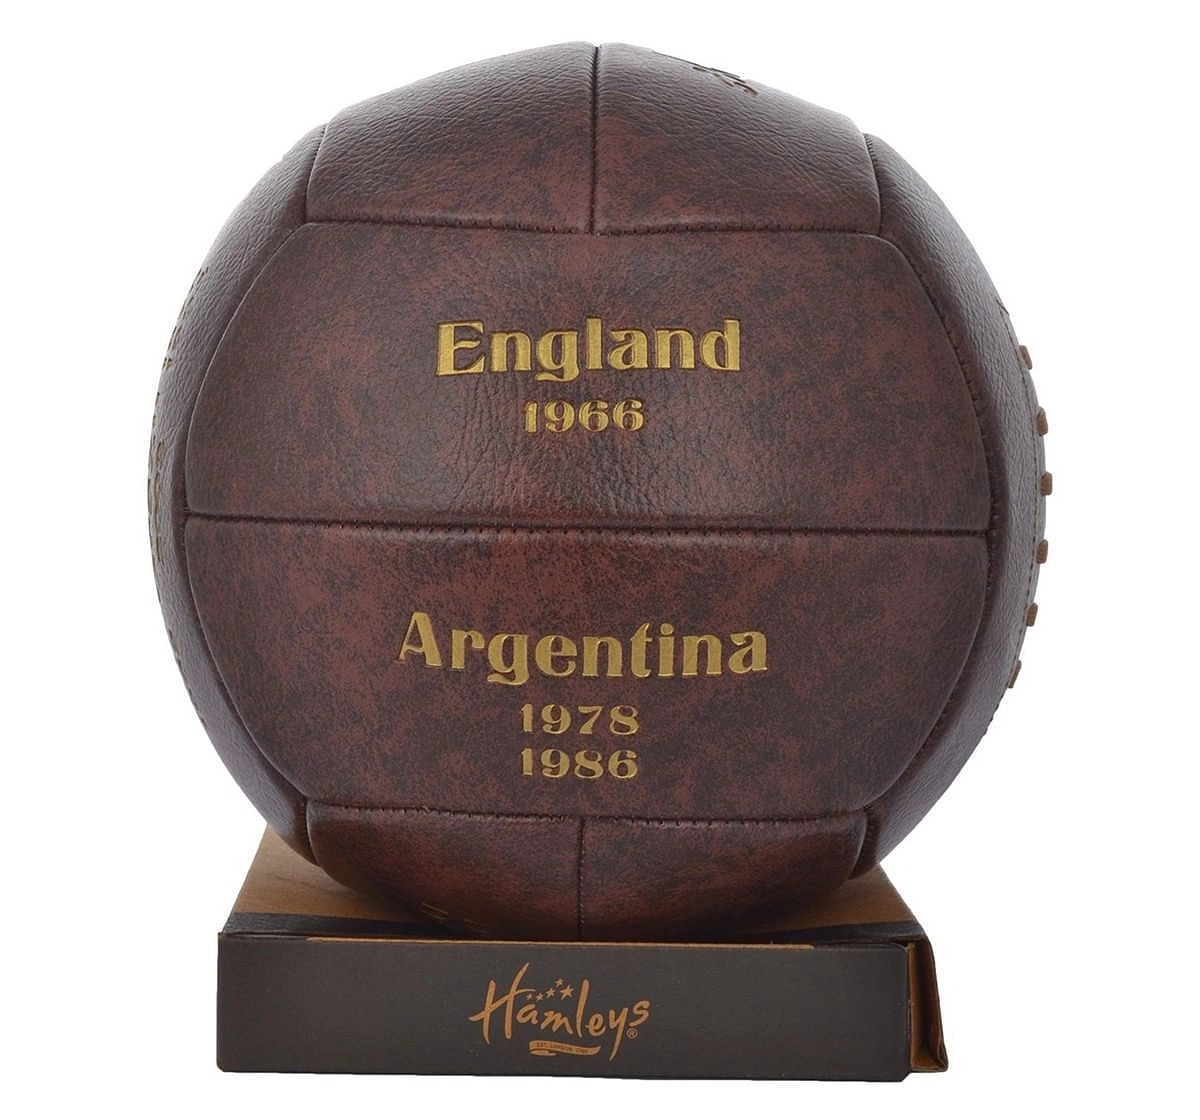 Hamleys World Cup Champion Single Tone Football for Kids age 3Y+ (Brown)